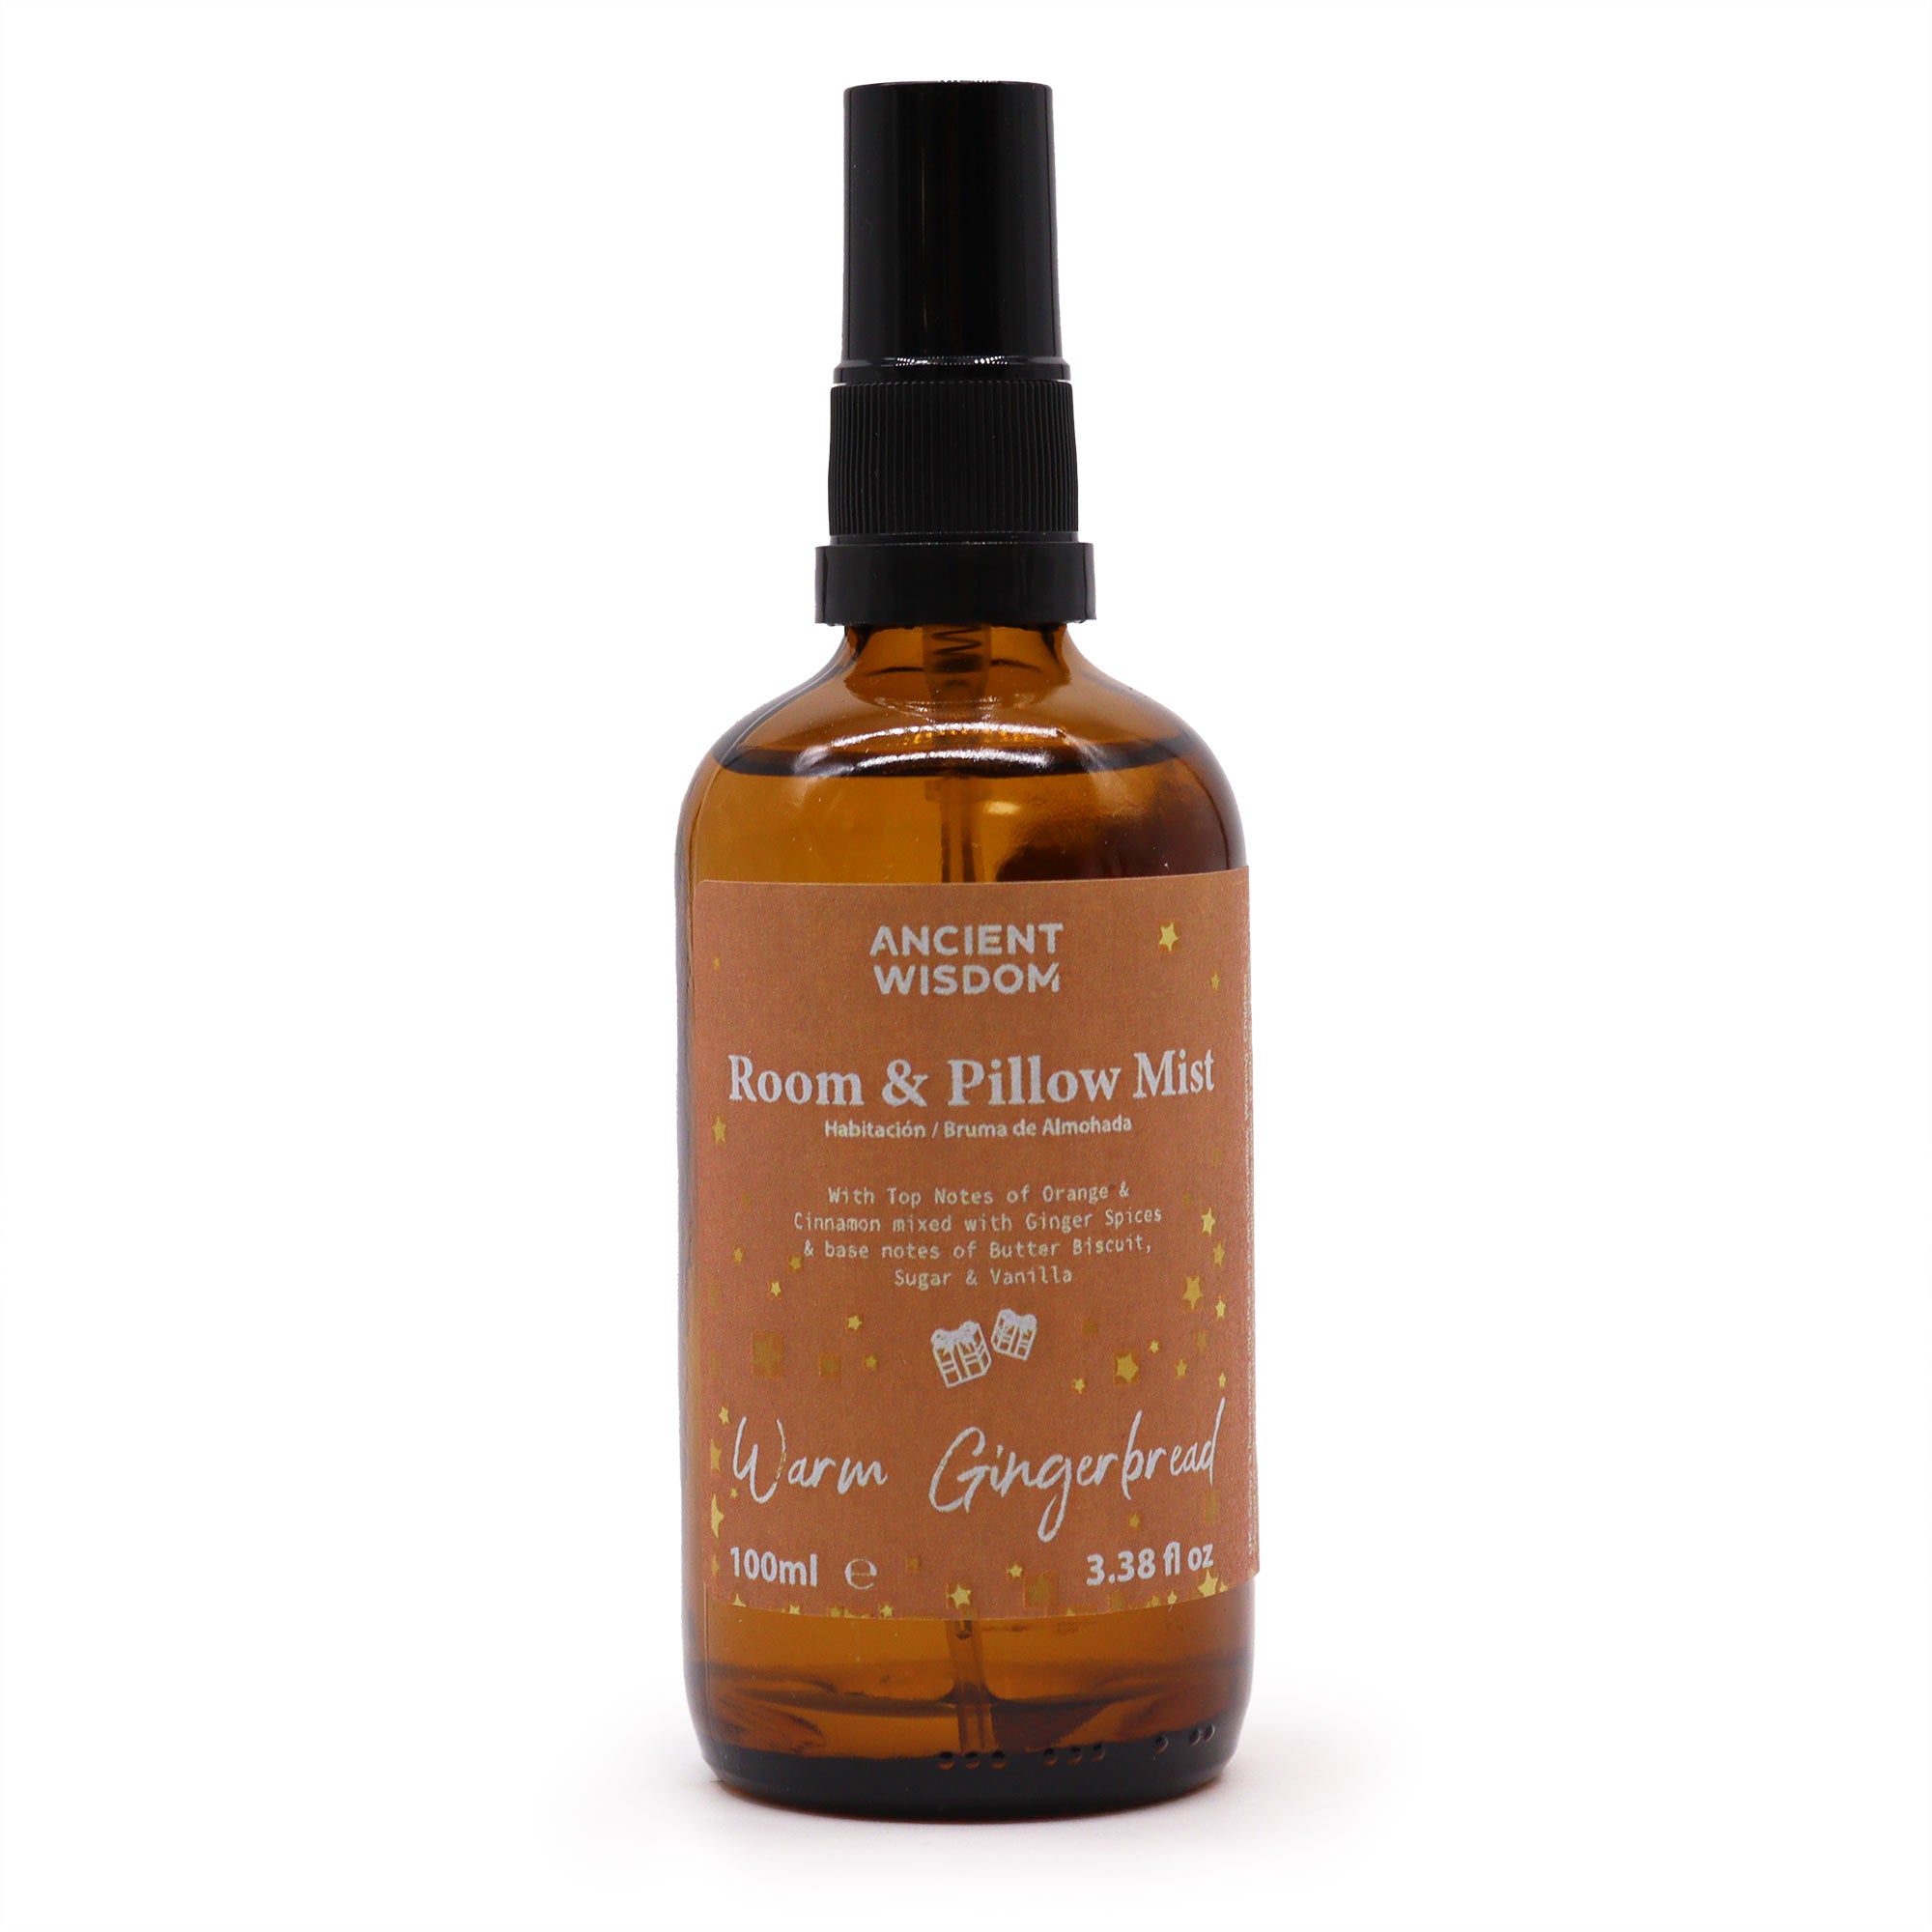 View Warm Gingerbread Room Pillow Spray 100ml information